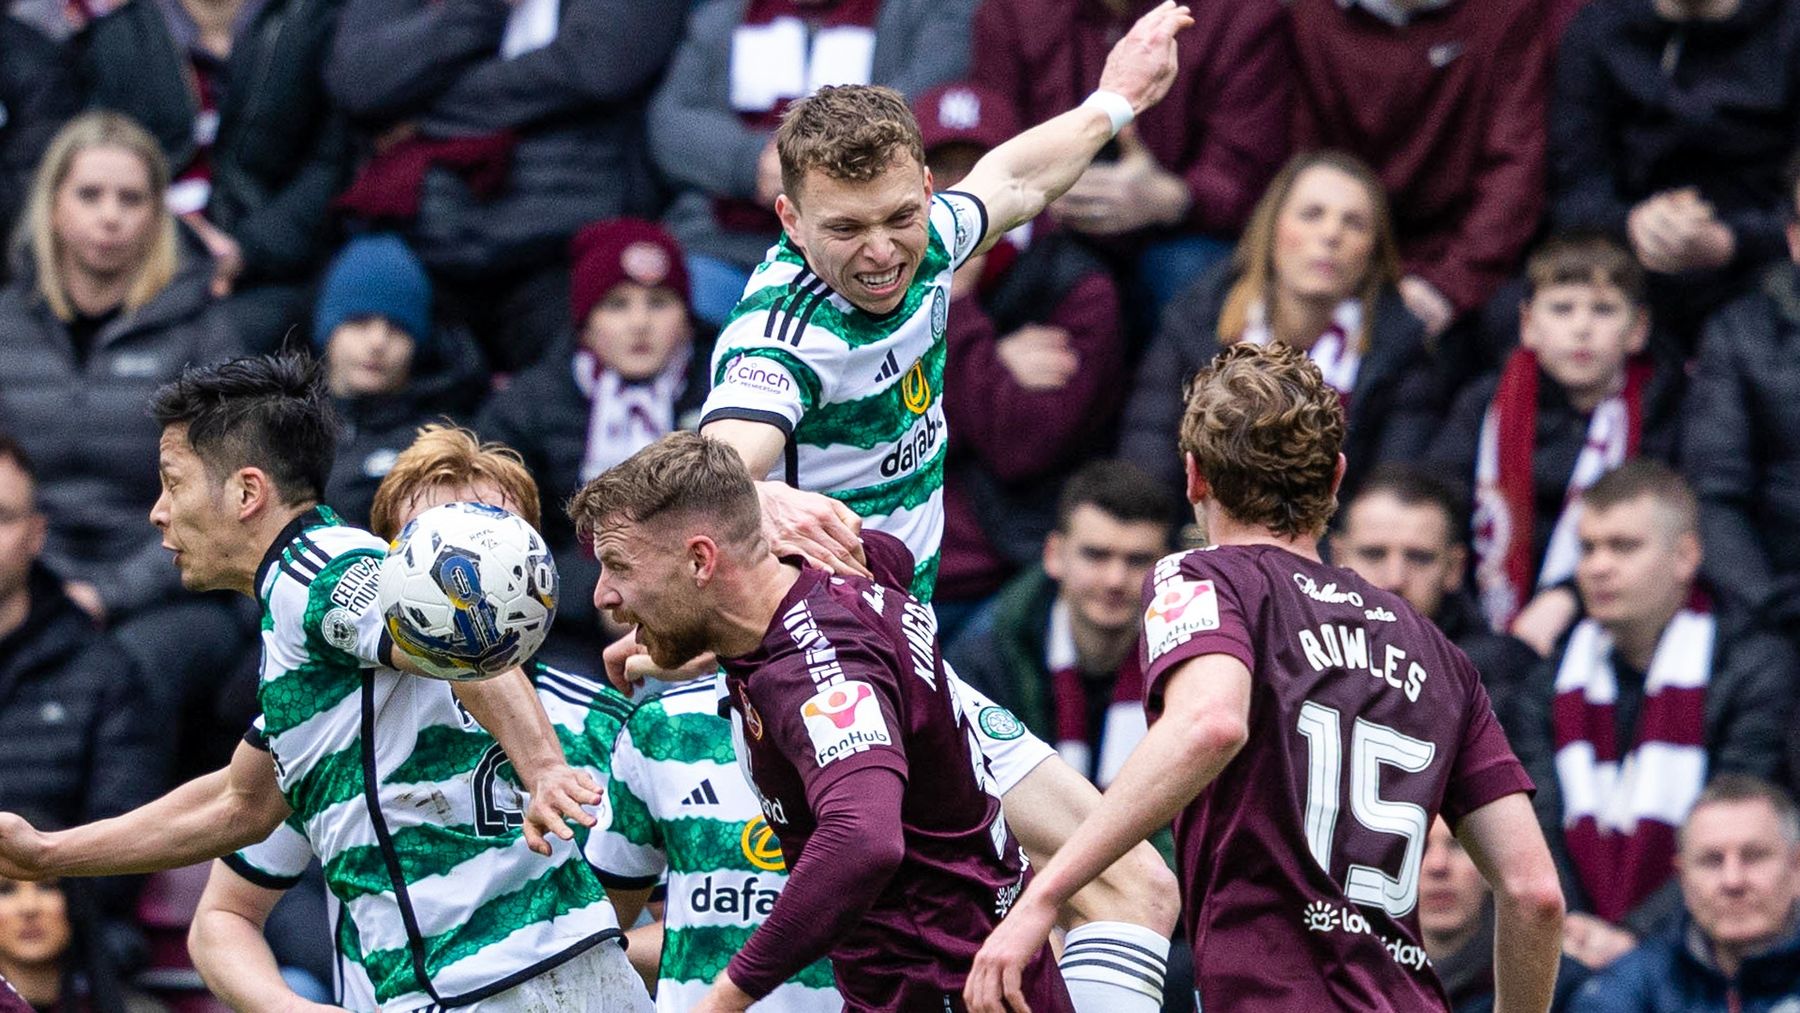 10-man Celts lose at Tynecastle as VAR plays part